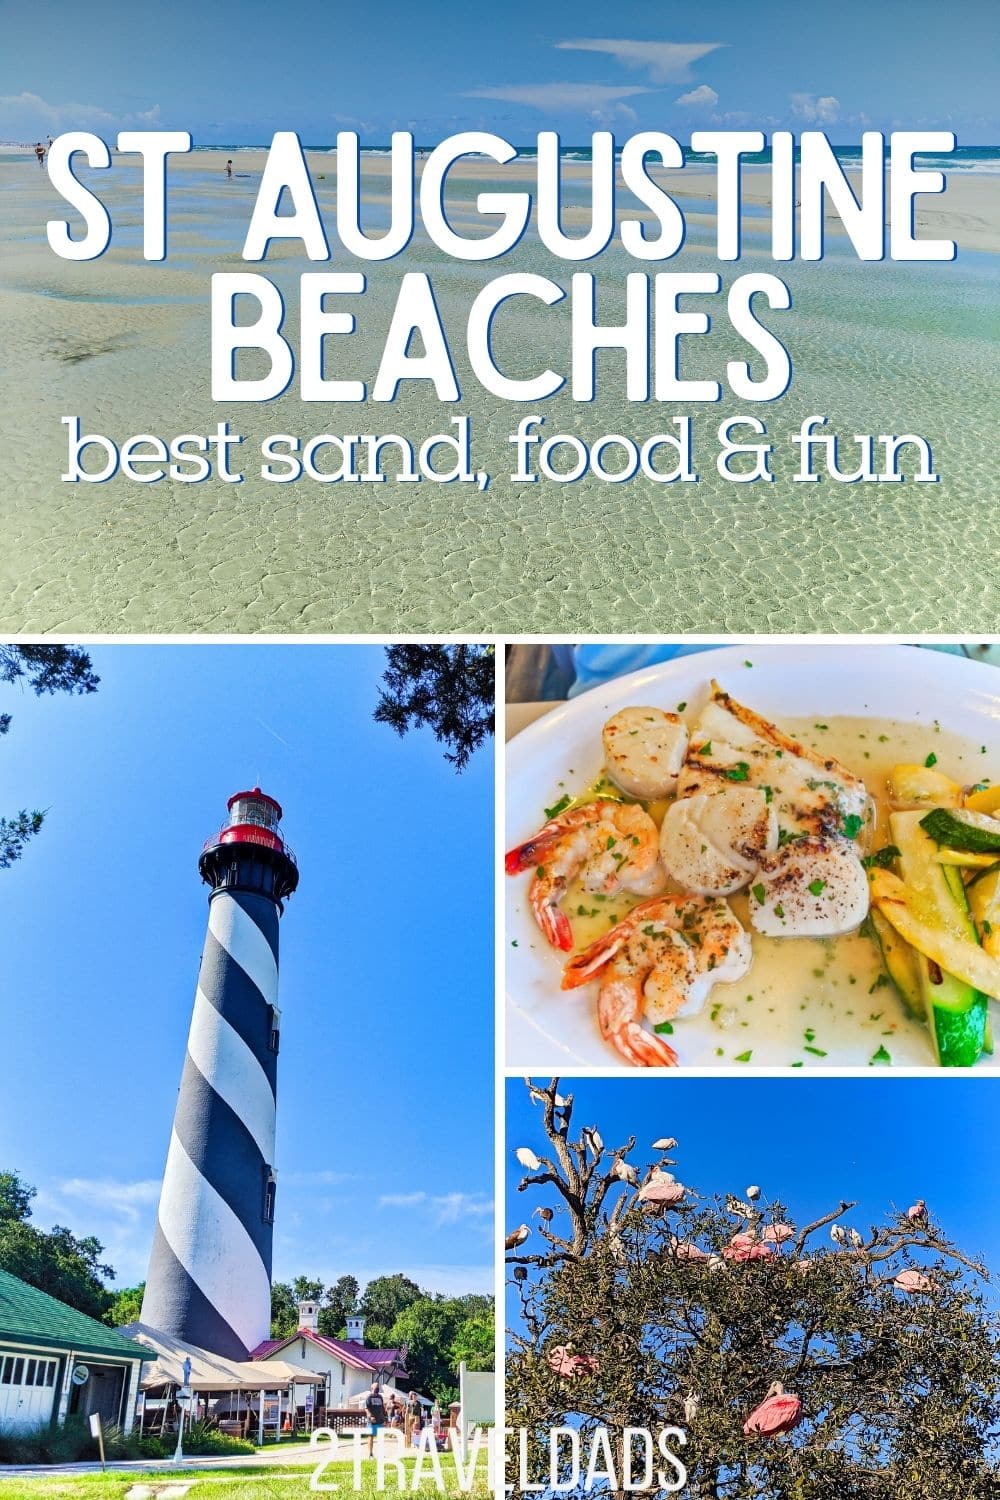 One of the best things about living in North Florida is how great St Augustine beaches are. From shark tooth hunting to enjoying great food in the beach neighborhoods, St Augustine beaches make for the perfect Florida vacation getaway.